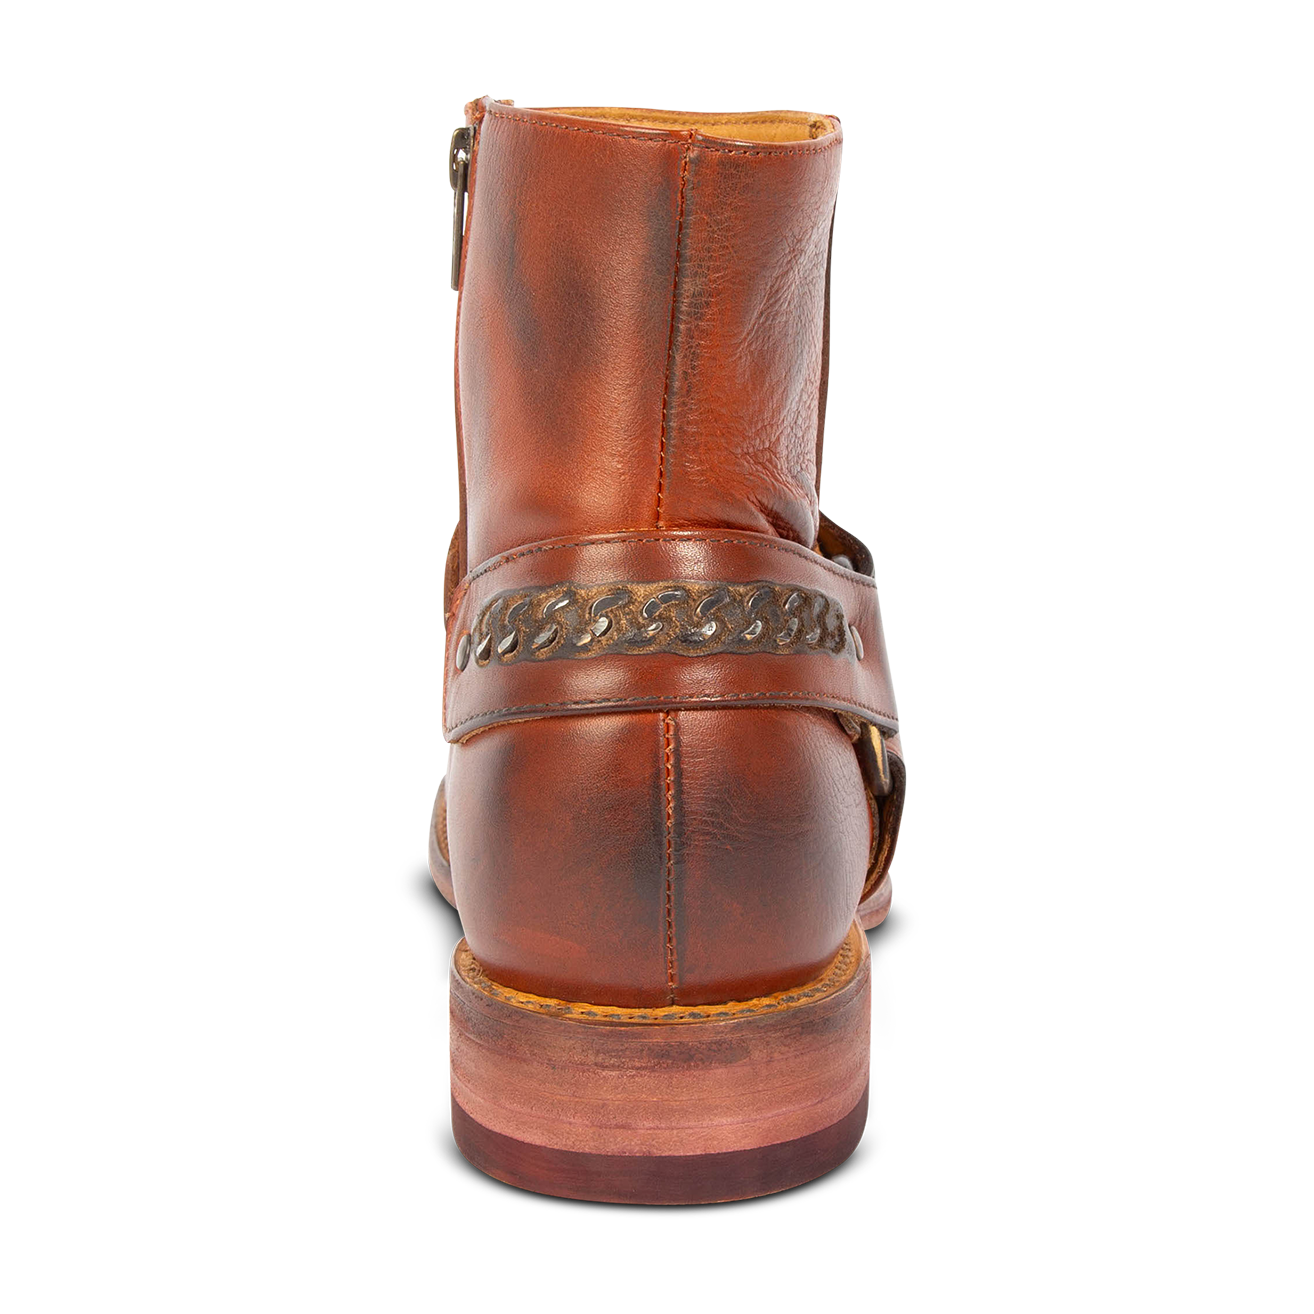 Back view showing a low block heel and ankle harness with chainlink decorative detailing on FREEBIRD men's Portland rust leather boot 